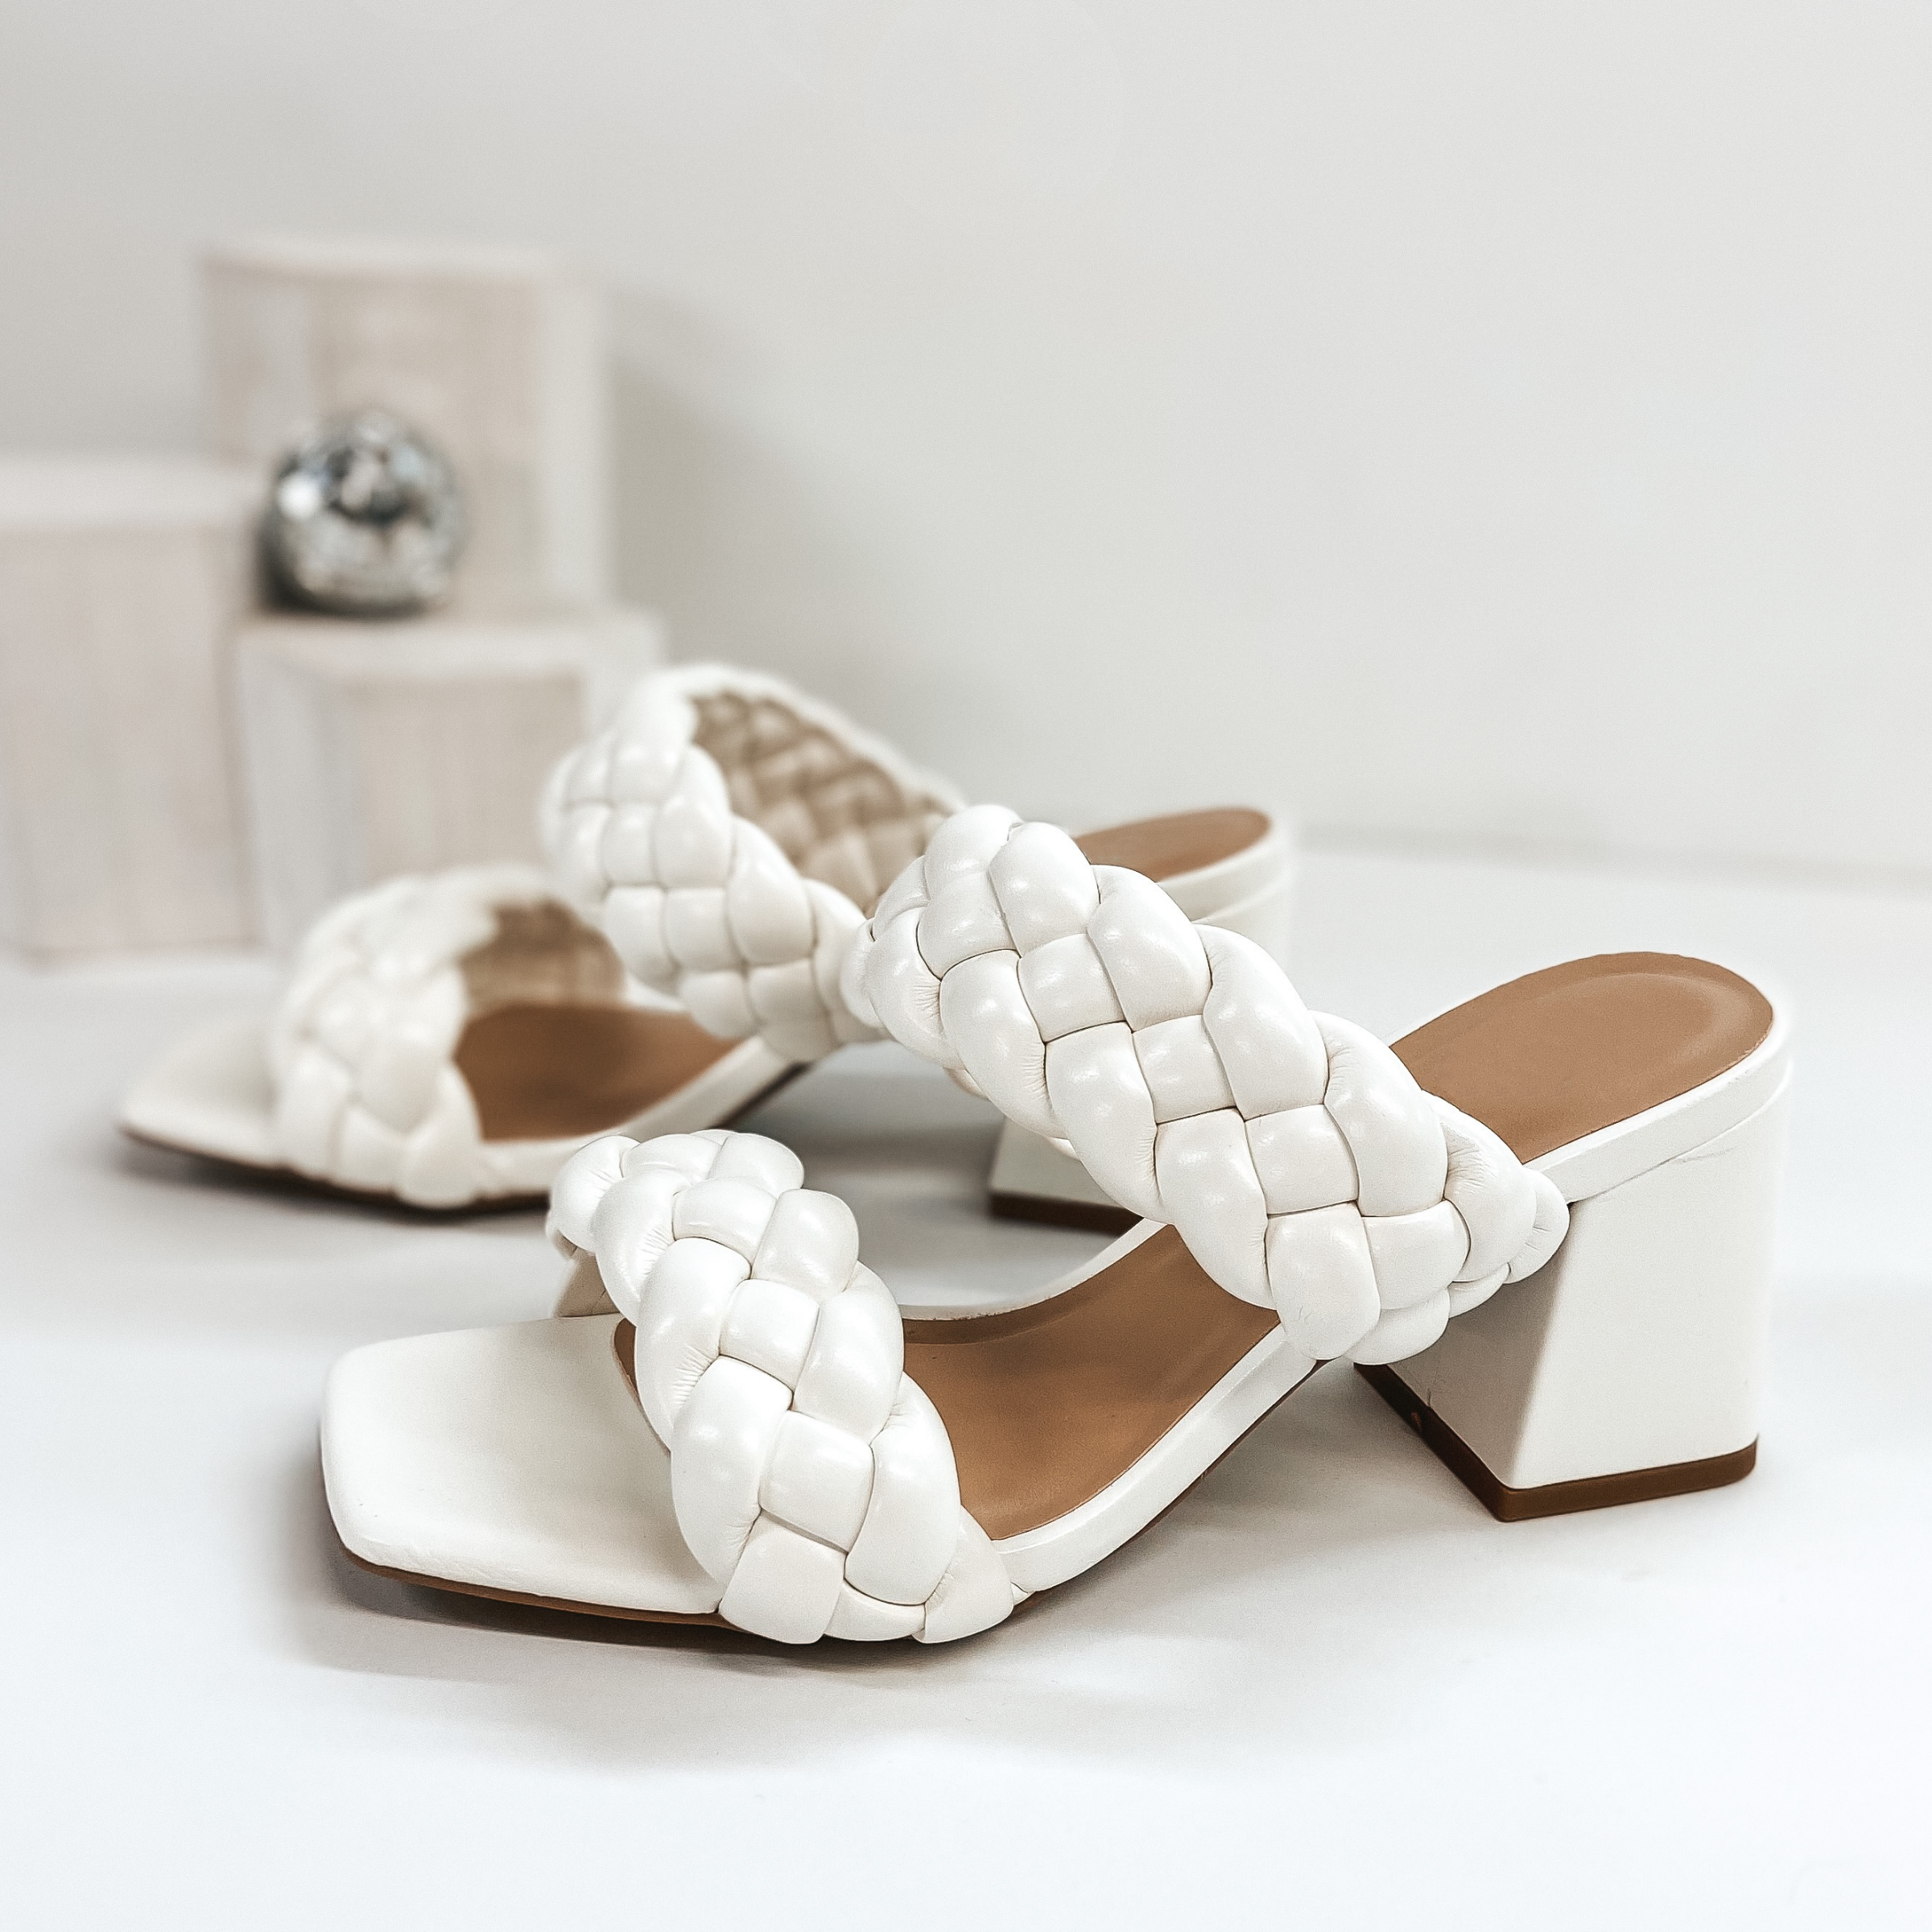 White braided sandals with a high heel. Pictured on white background.